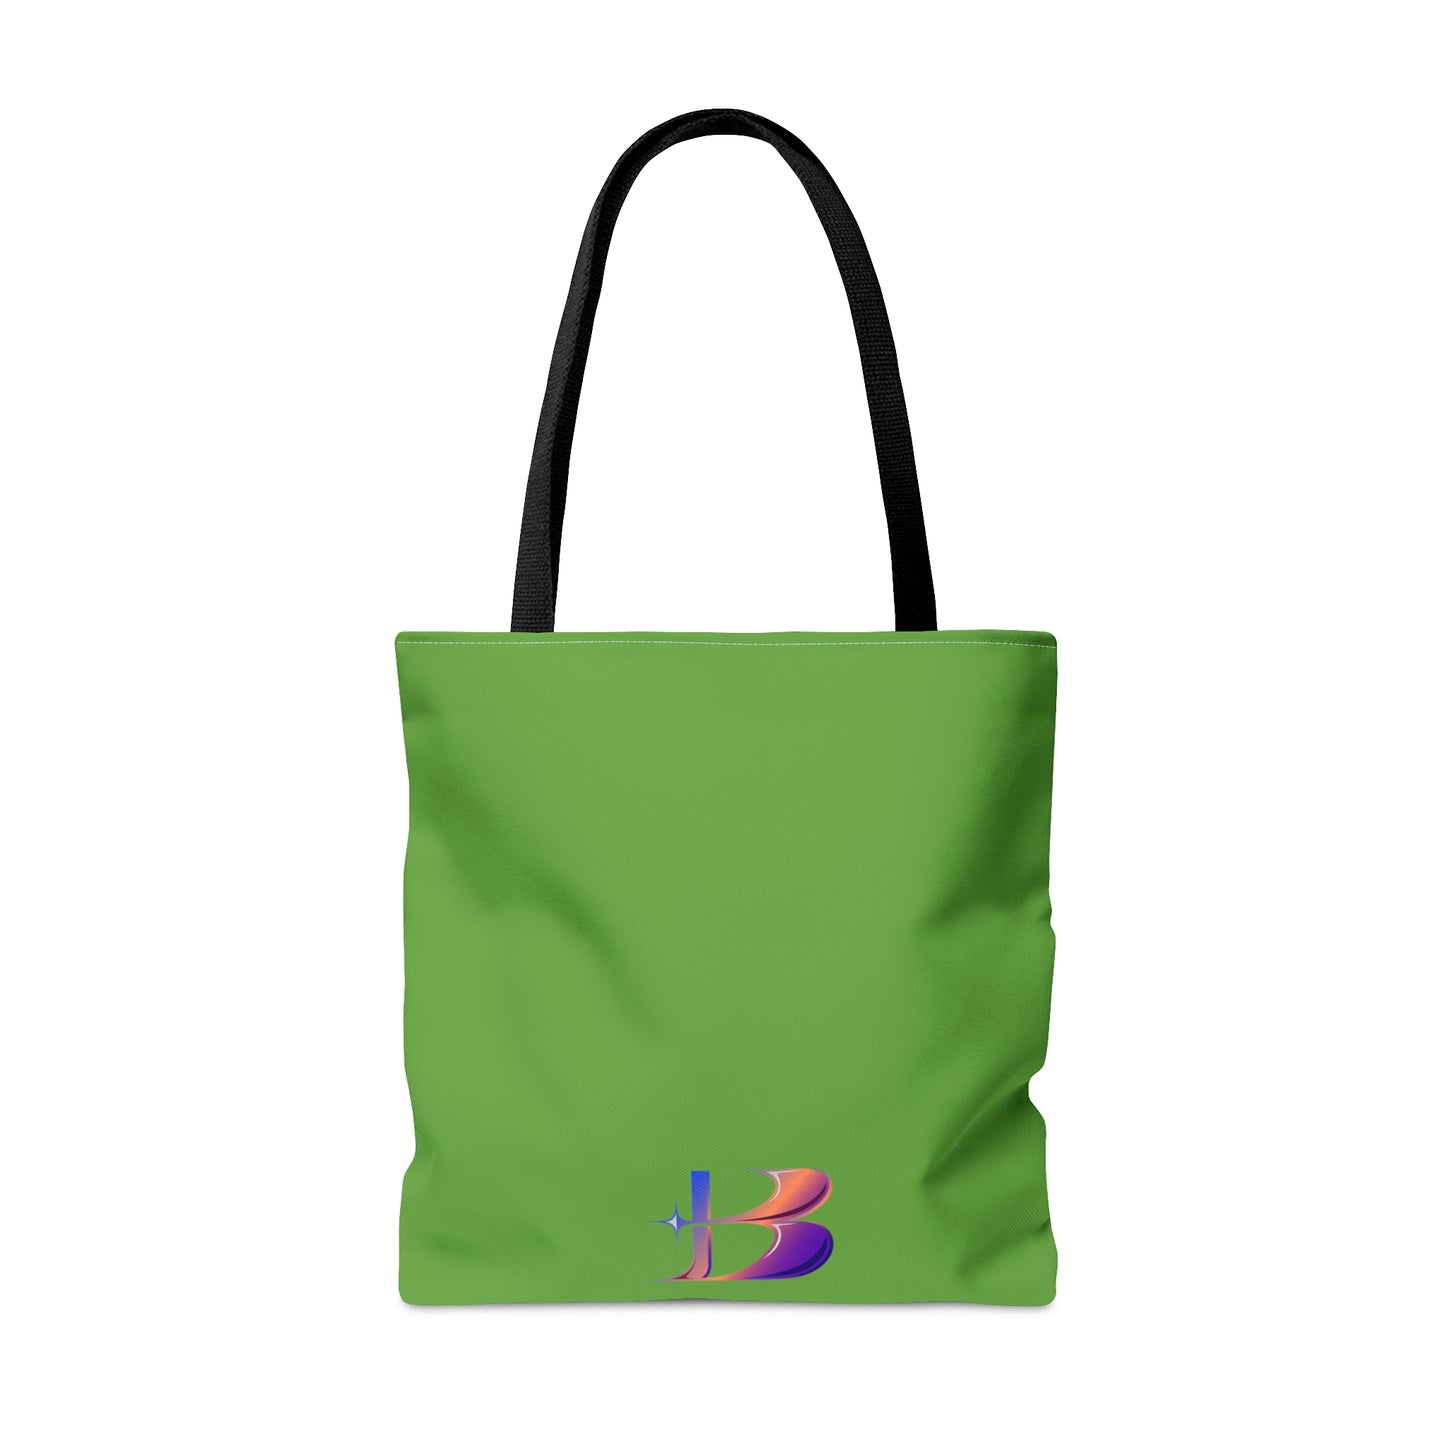 White Tulip Tote Bag (SP Photography Collection) GREEN